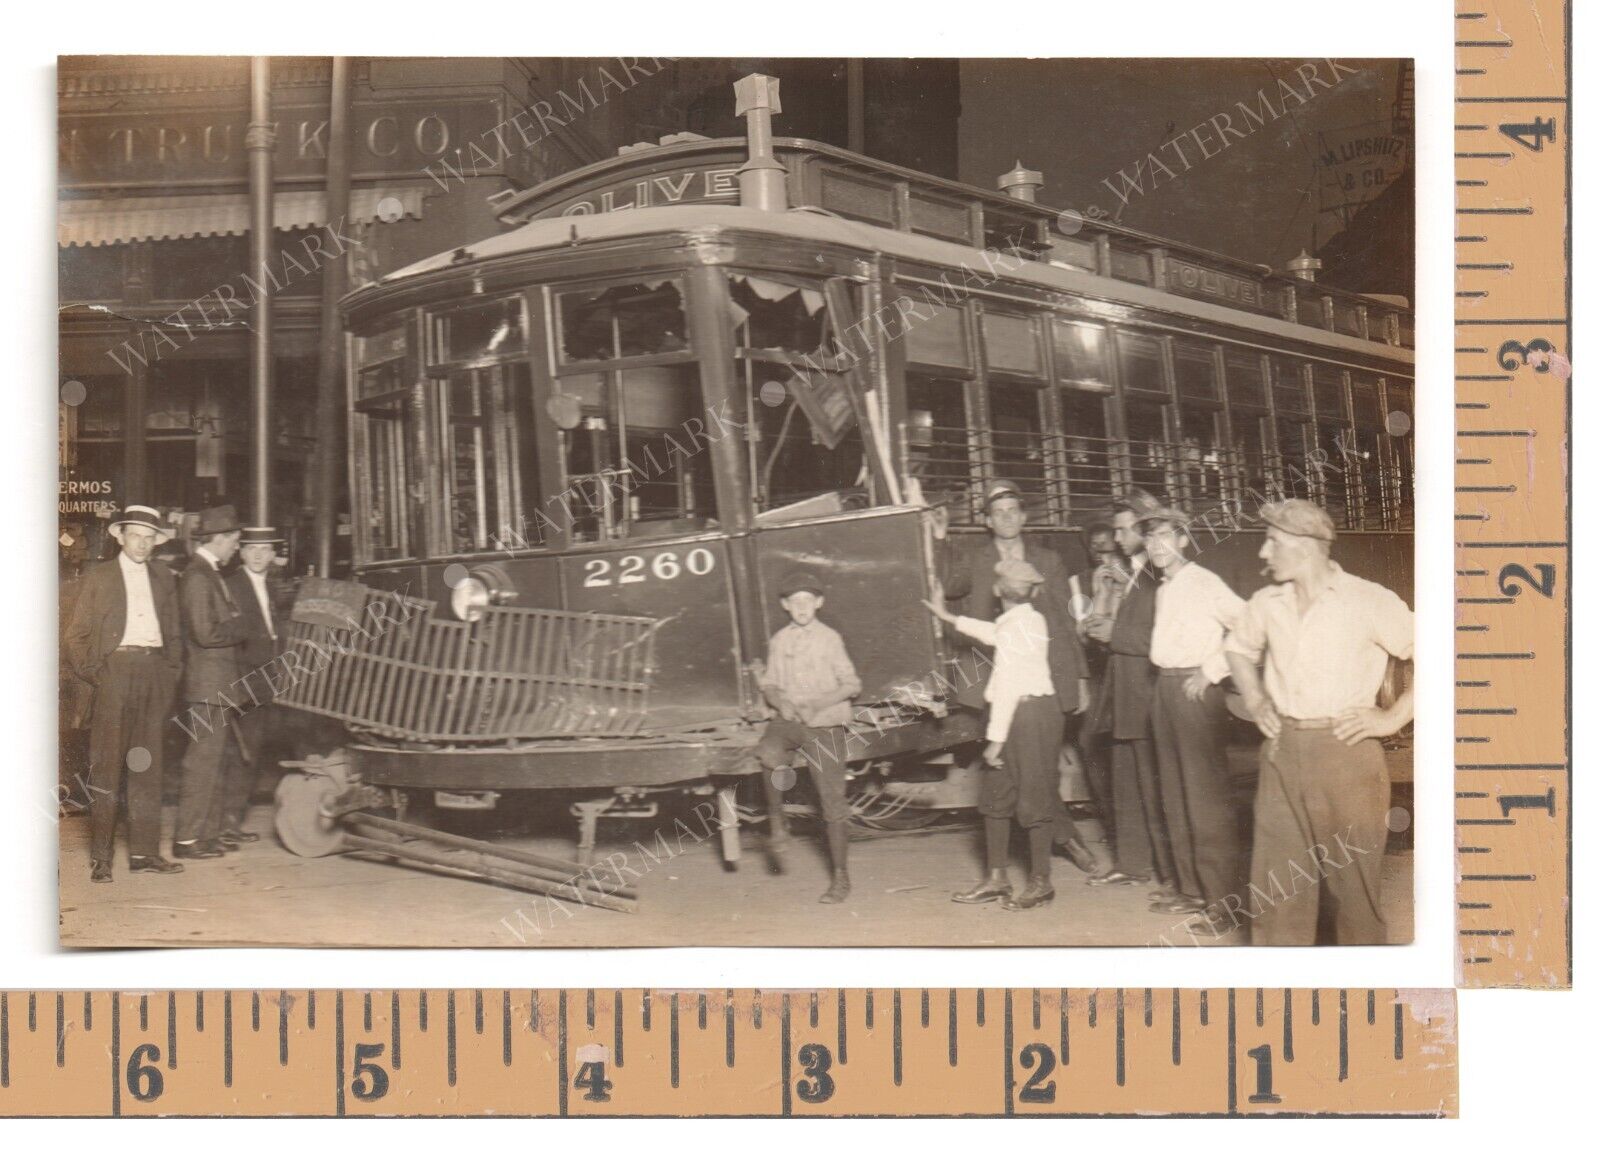 1925 OOAK TYPE-1 Photo: TROLLEY WRECK of St Louis OLIVE Blvd Streetcar